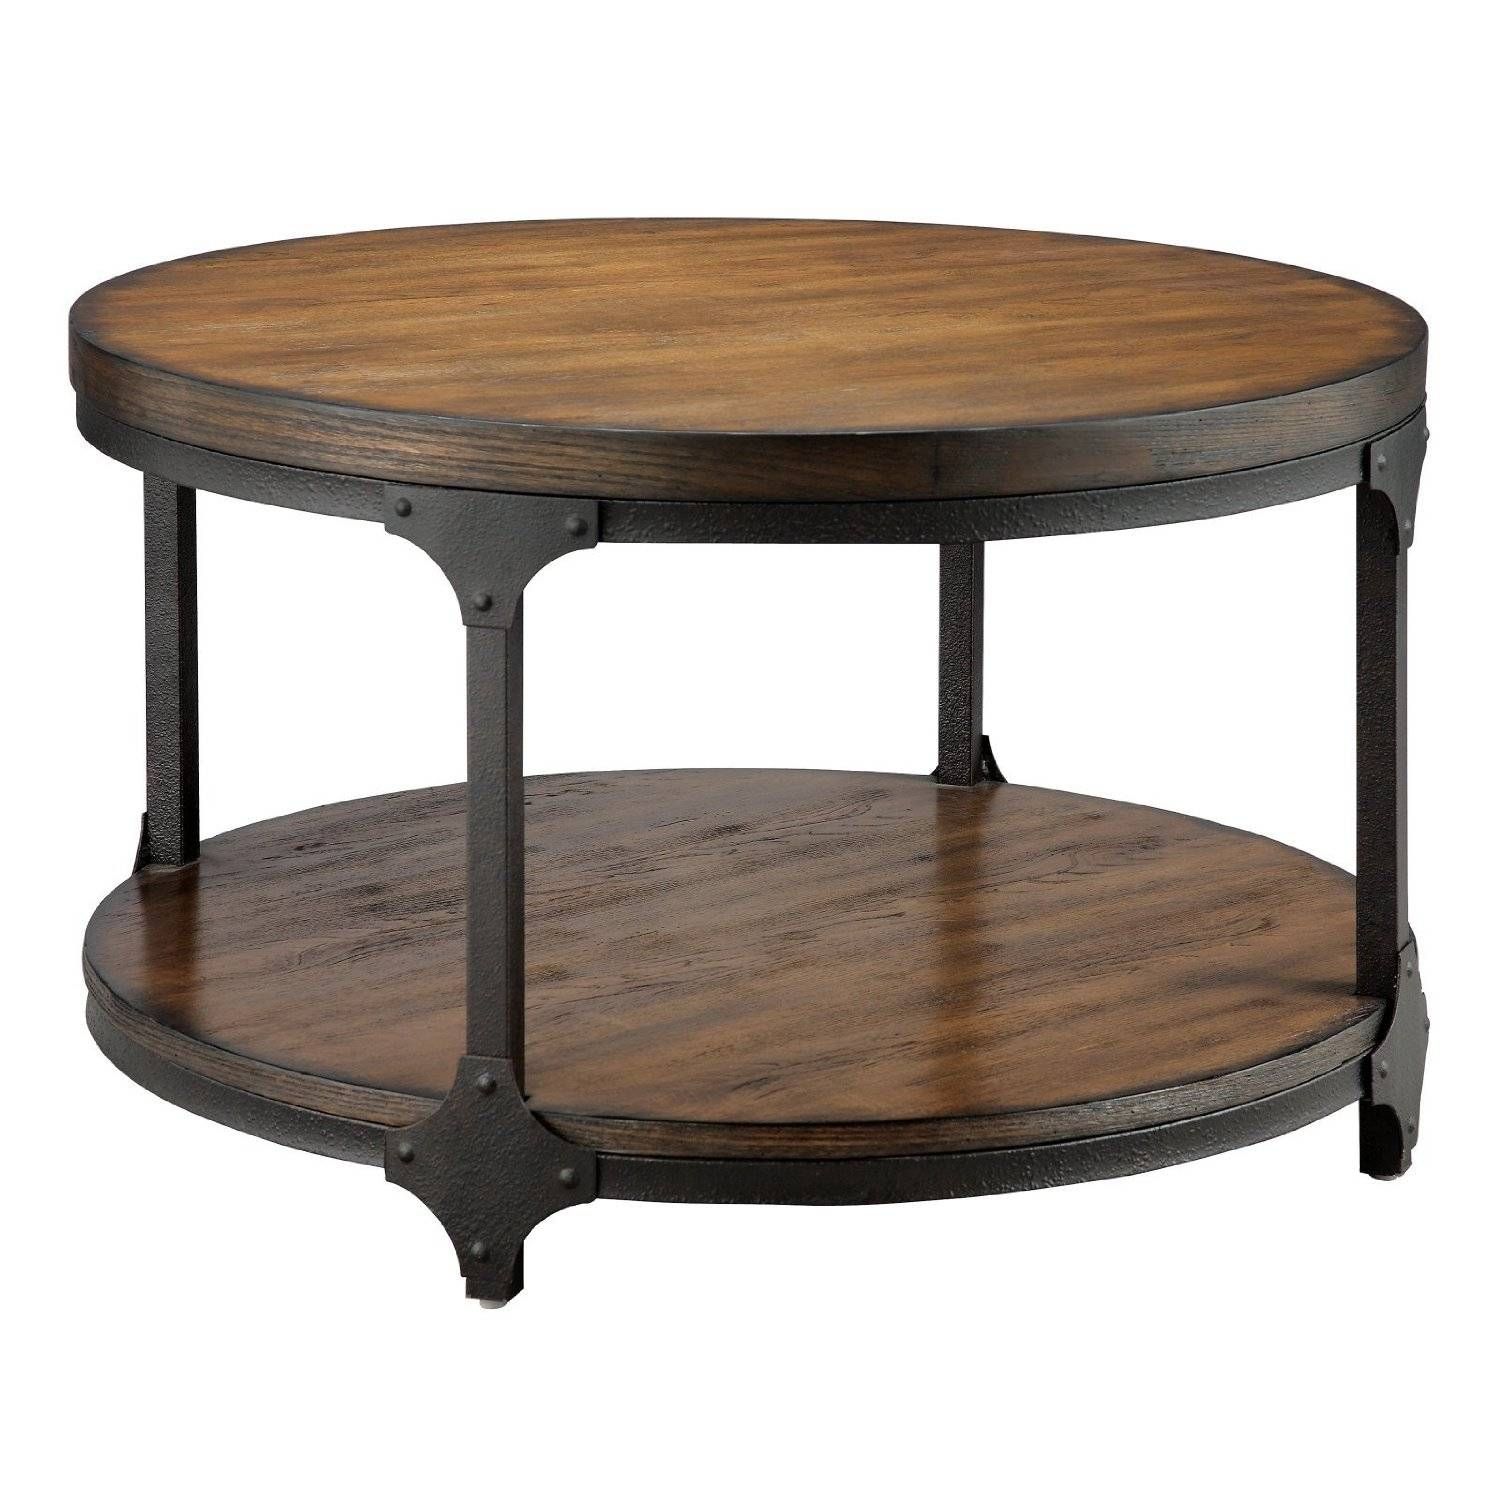 Coffee Tables: Best Small Round Coffee Tables Ideas Large Round In Round Coffee Tables With Storages (View 19 of 30)